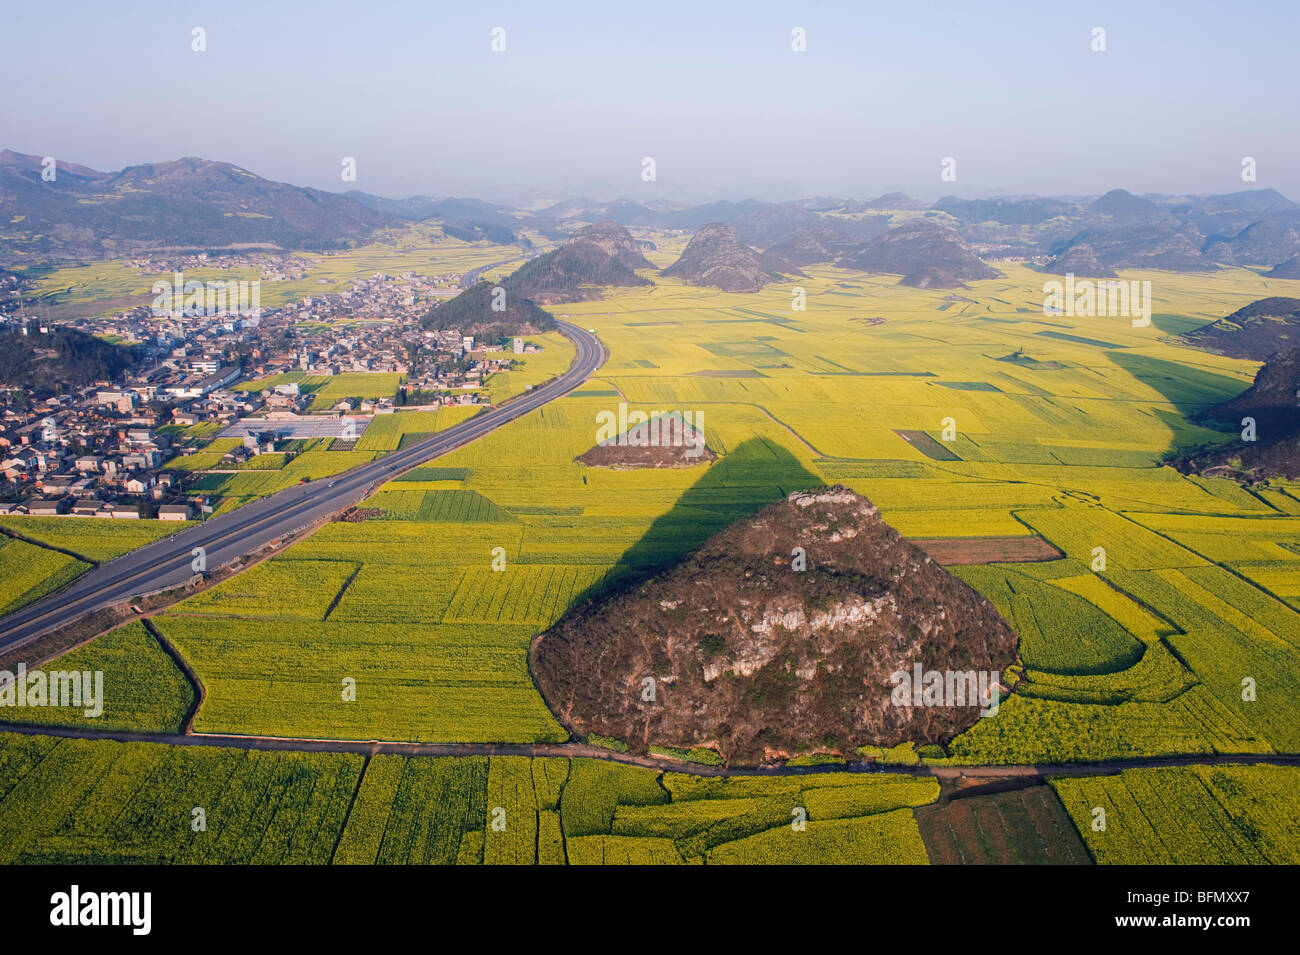 China, Yunnan province, Luoping, rapeseed flowers in bloom Stock Photo